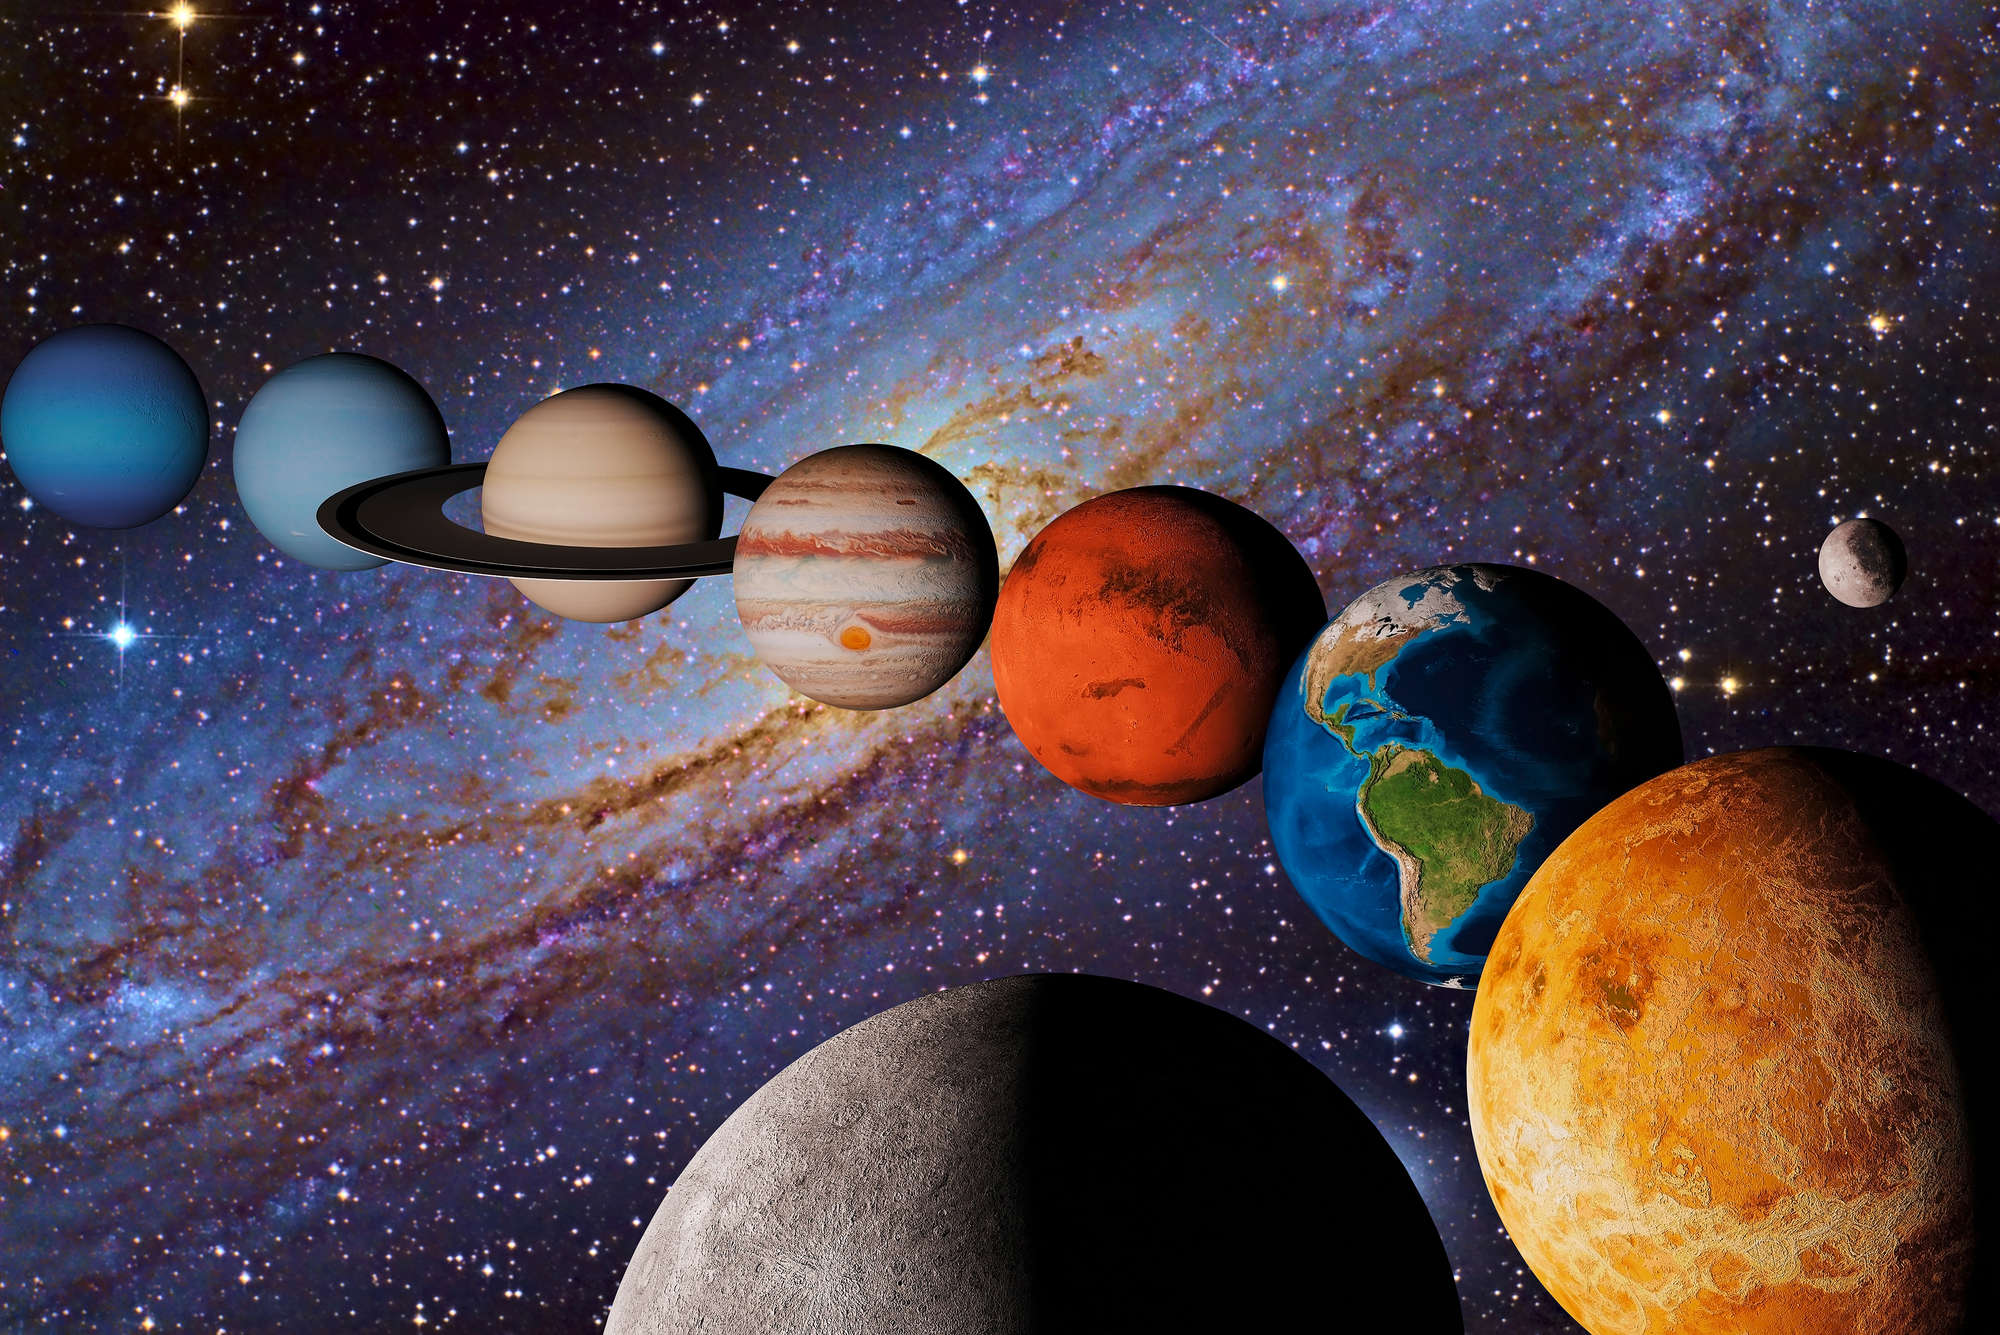             Galaxy photo wallpaper planets of our solar system on structural nonwoven
        